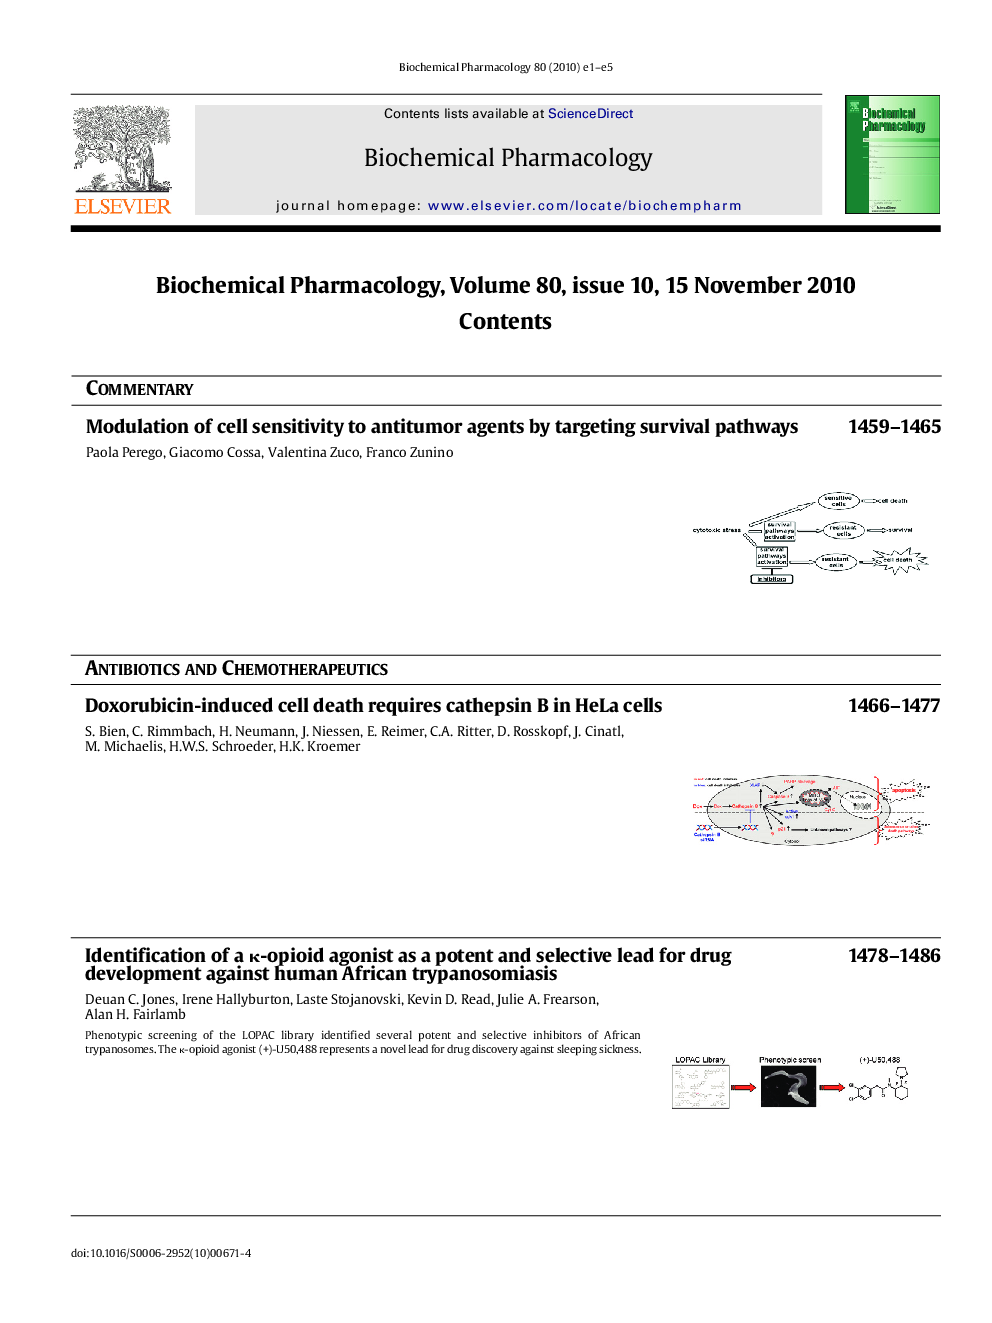 Graphical Abstracts Contents